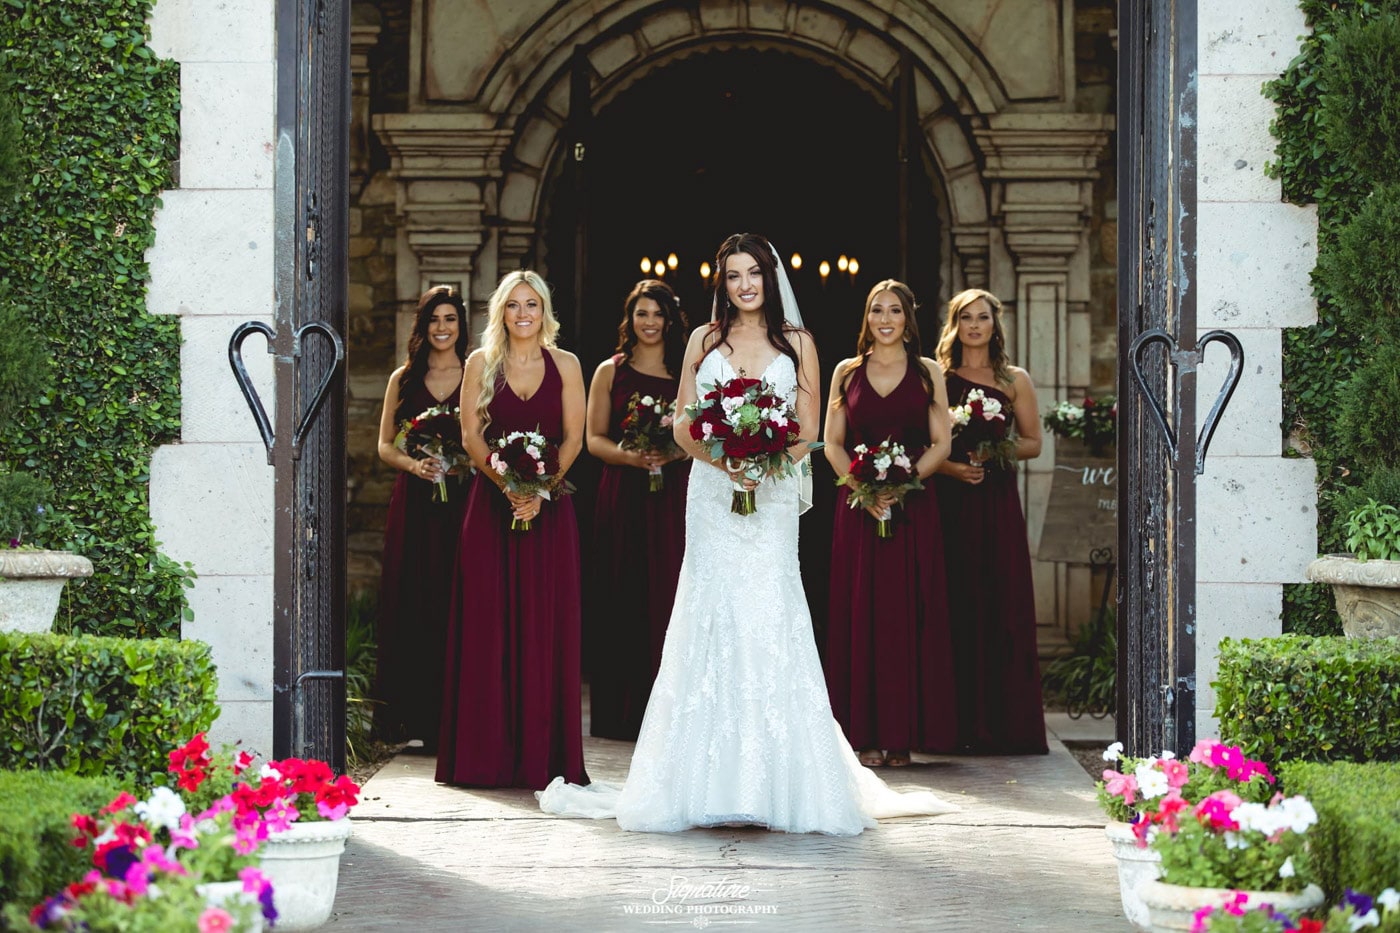 Bride and bridesmaids outside in open gate